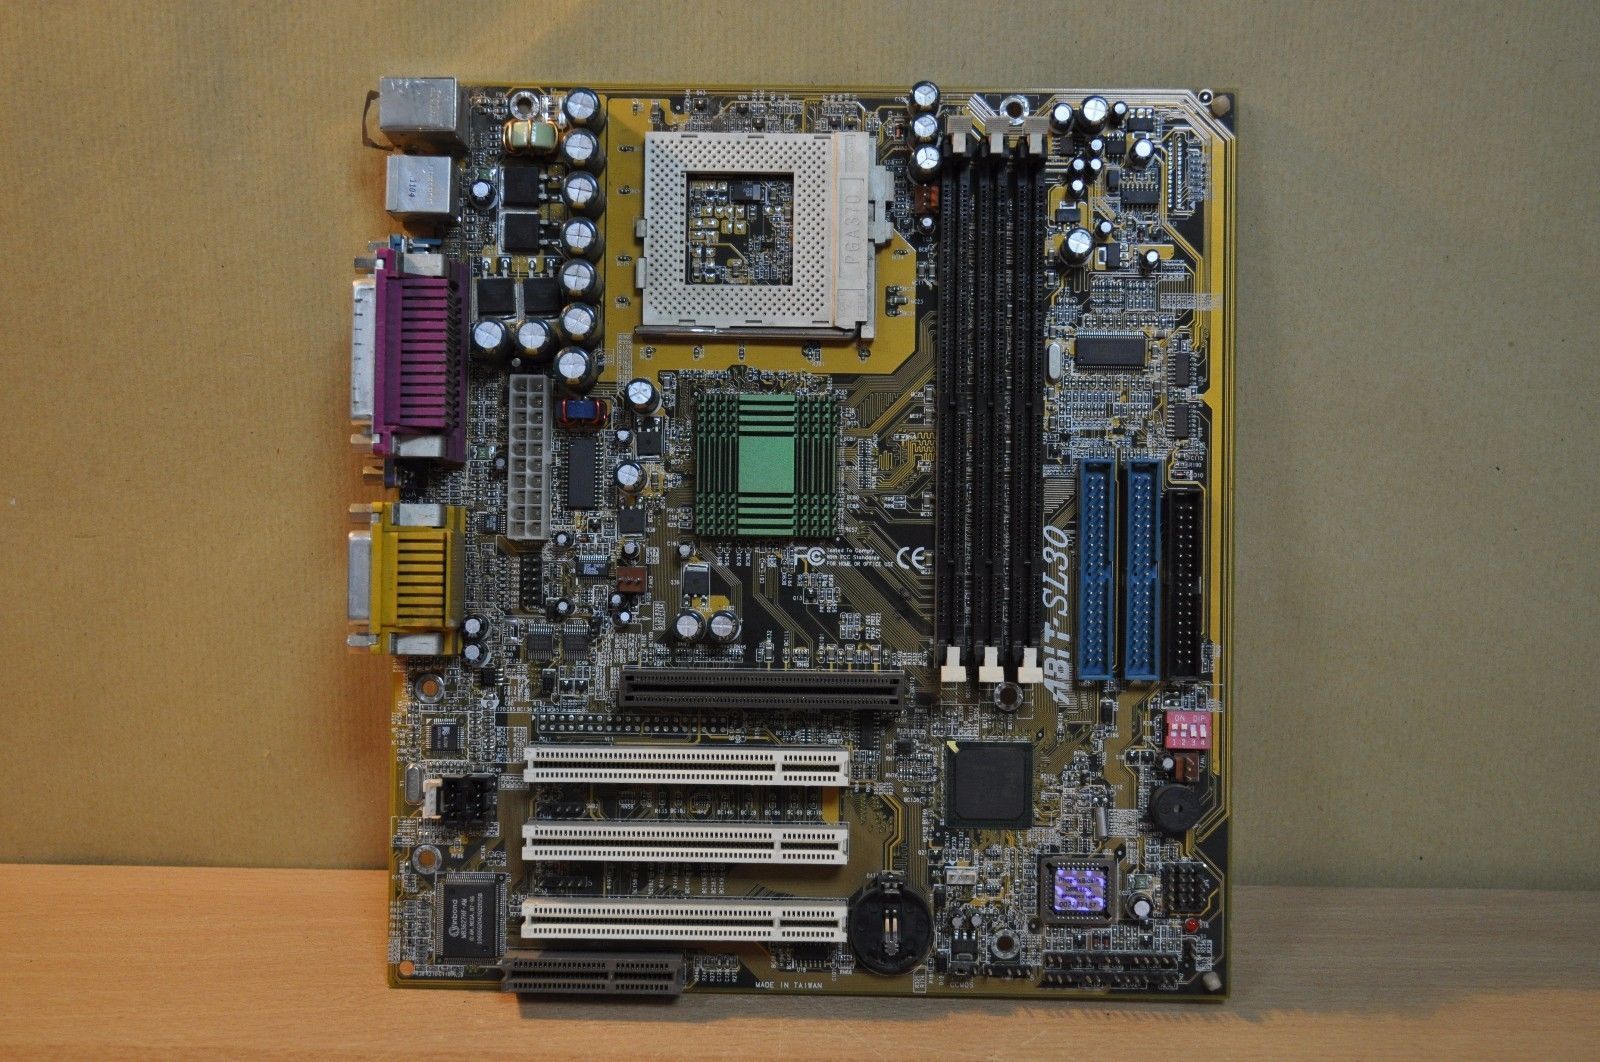 Socket 370 Motherboards - Retro PC Store